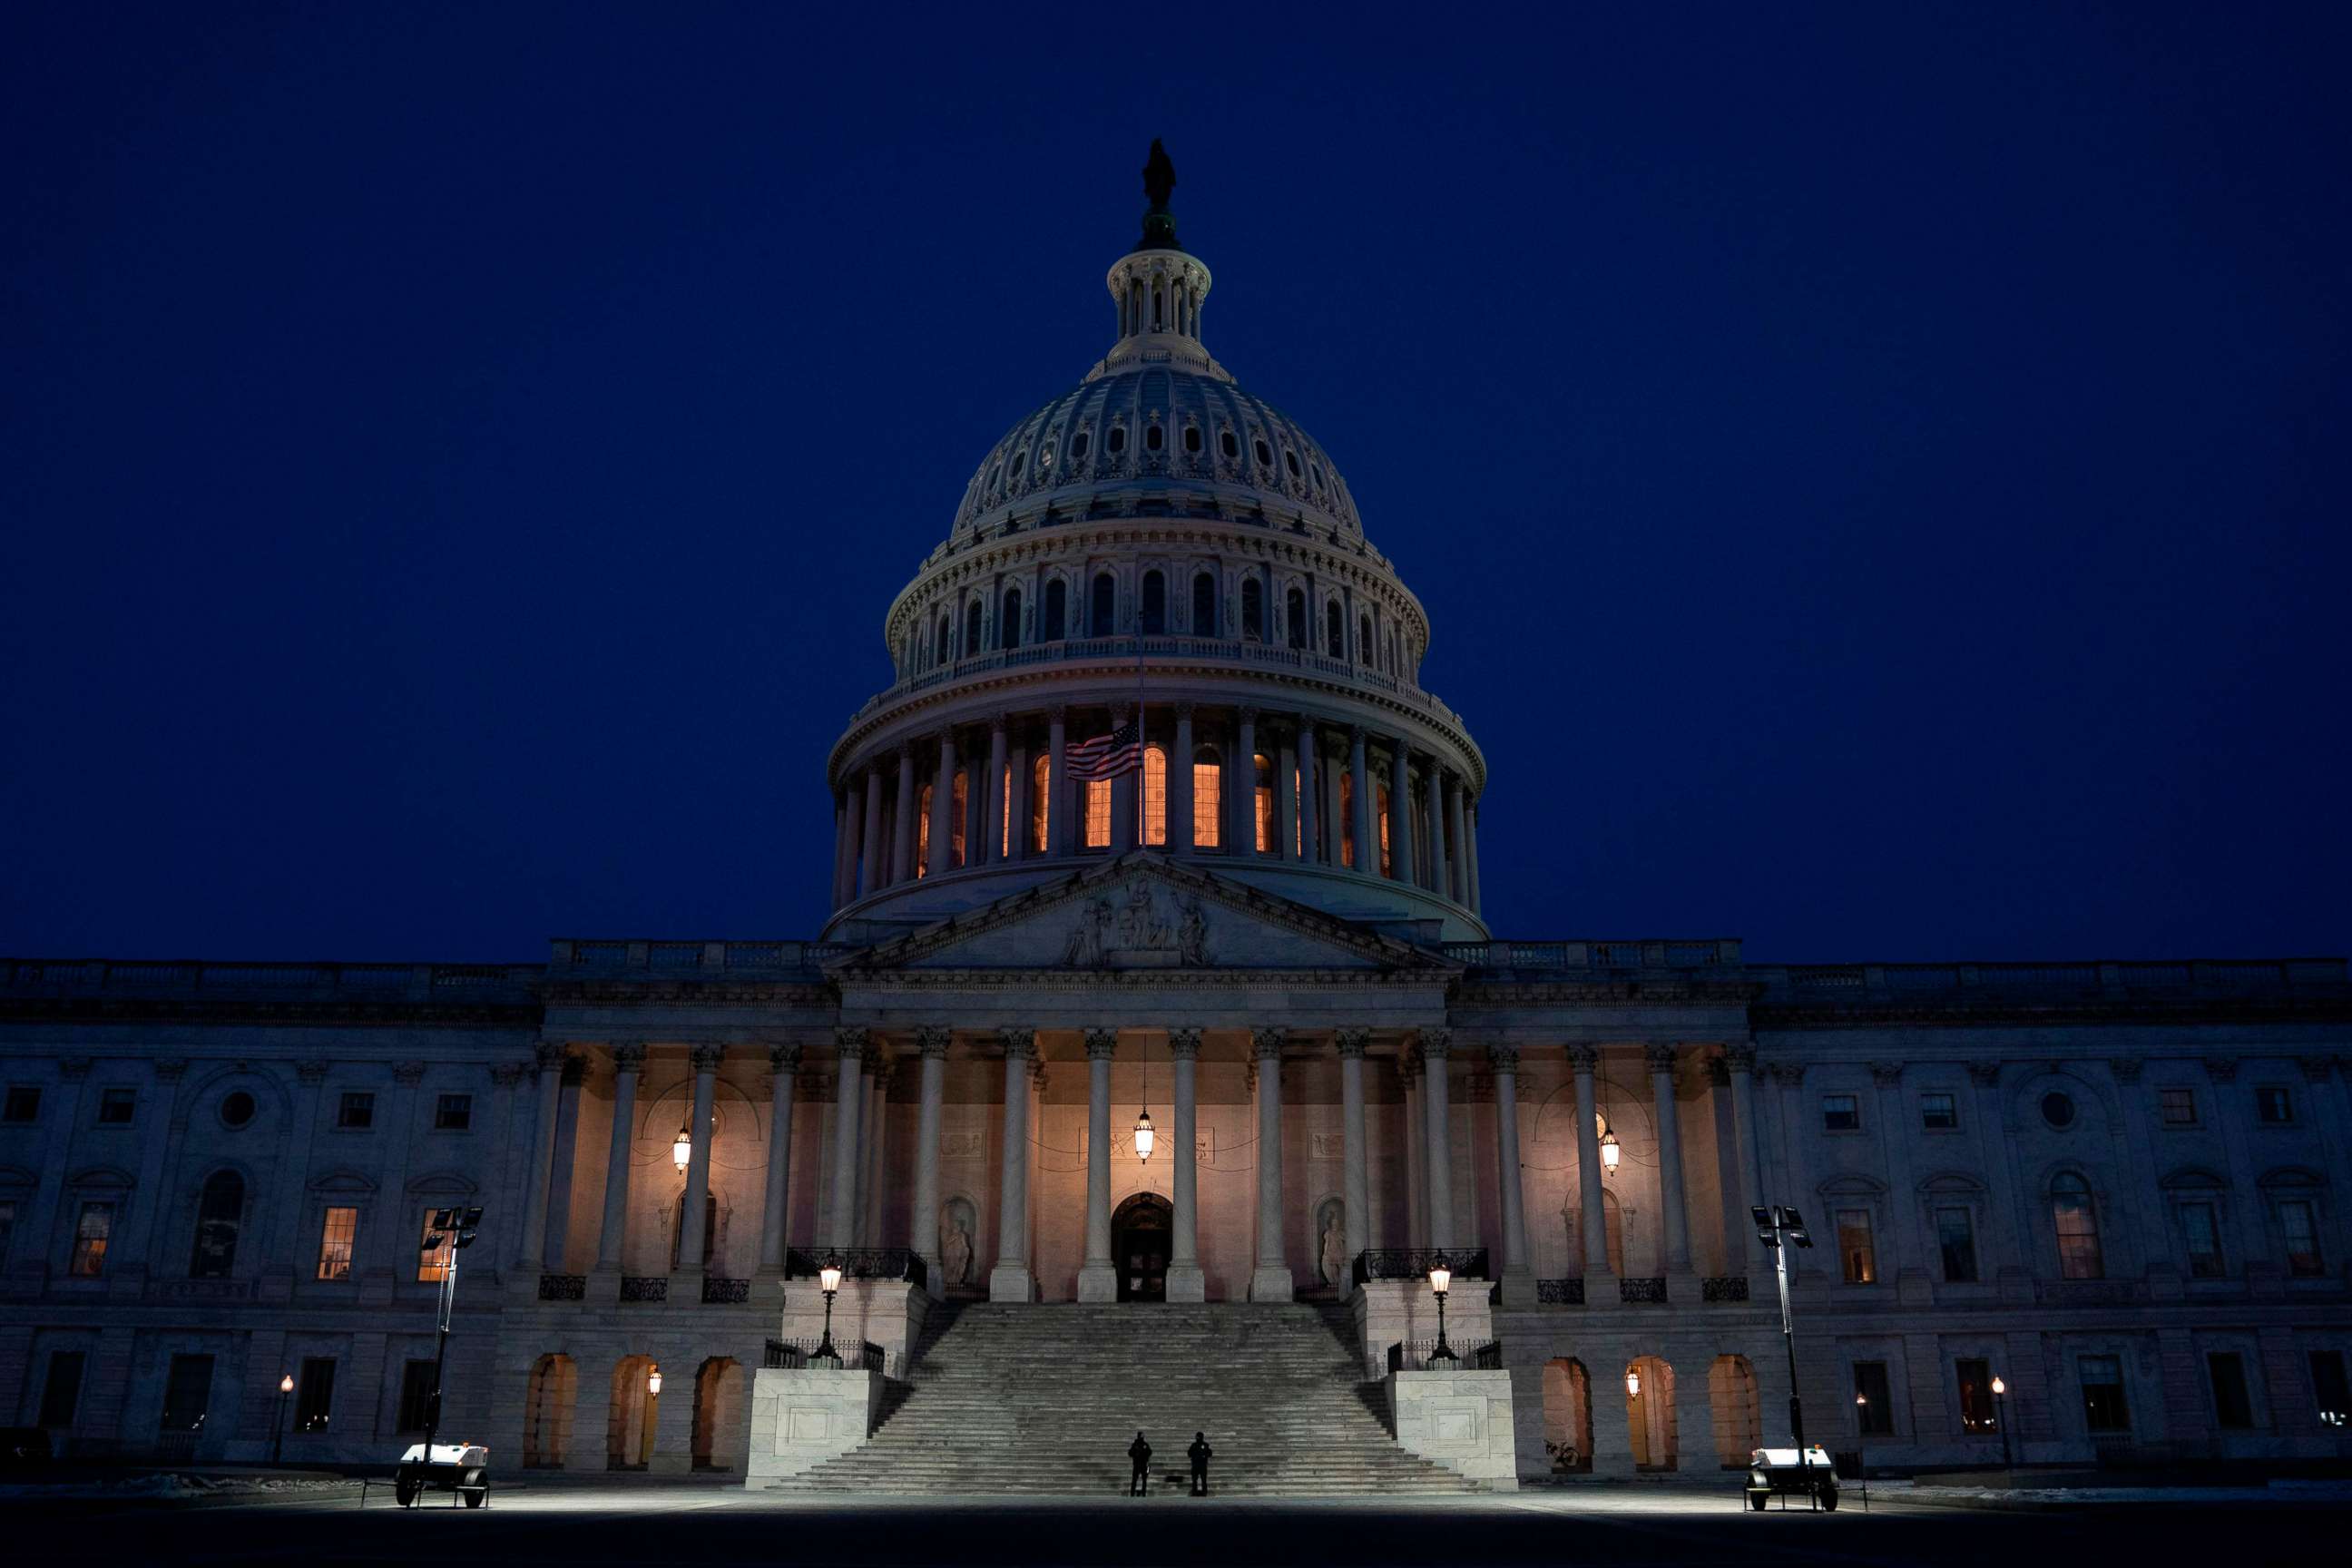 PHOTO: The U.S. Capitol Building is seen at sunrise on Feb. 3, 2021, in Washington, D.C.